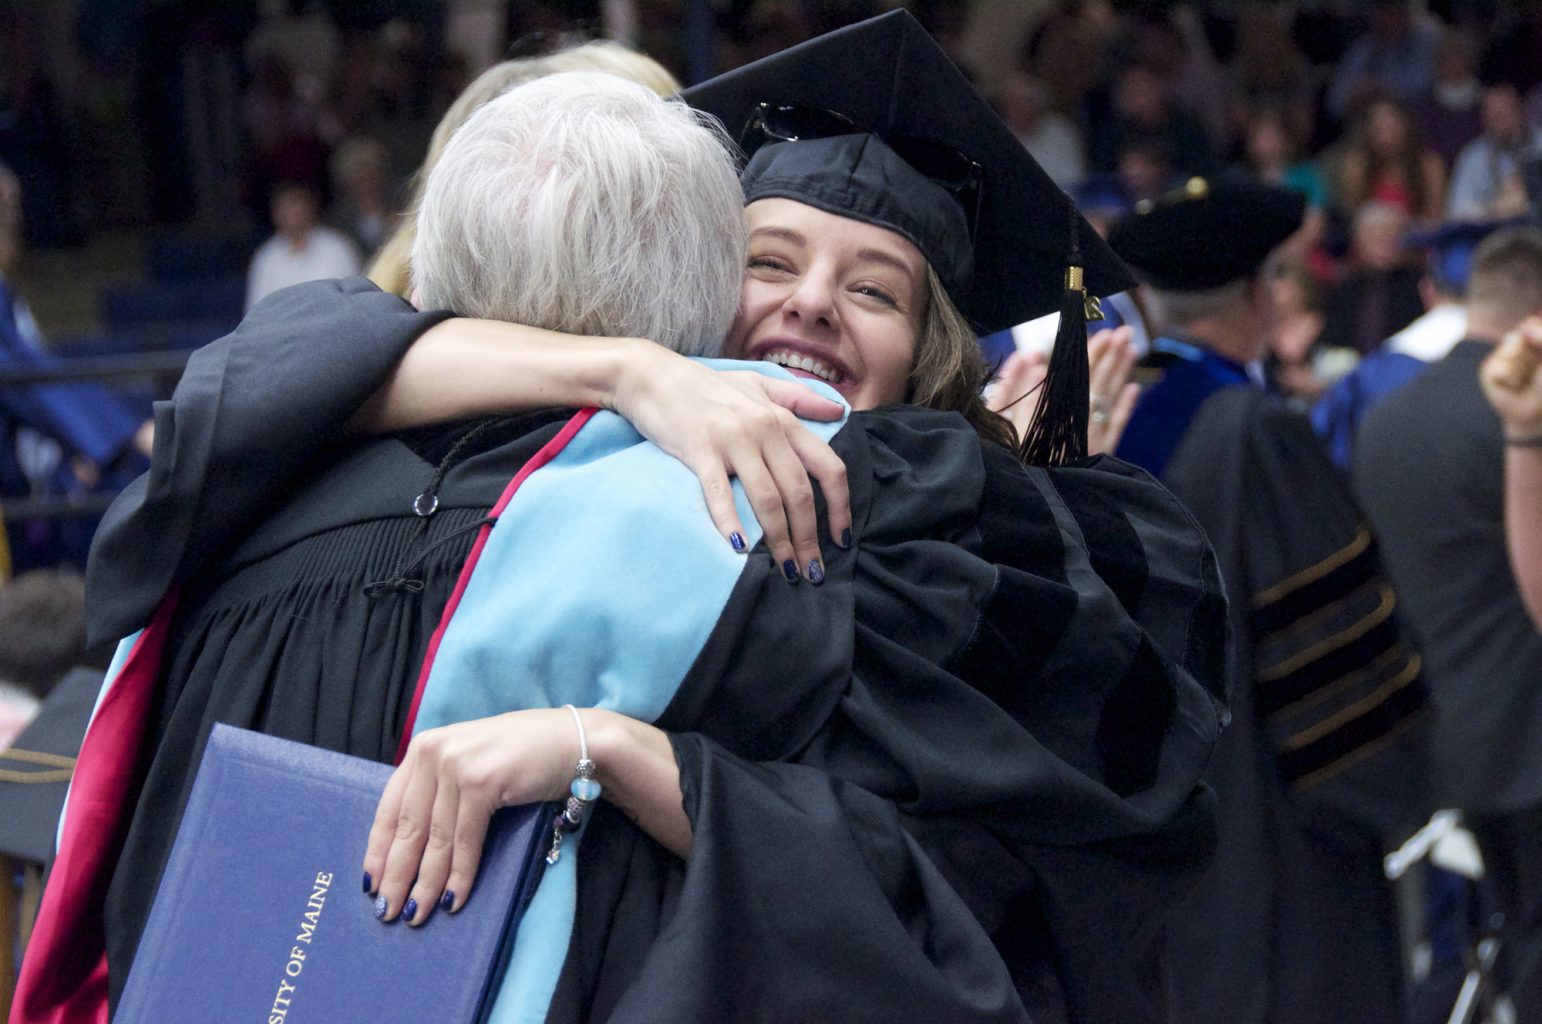 Two students hugging at commencement